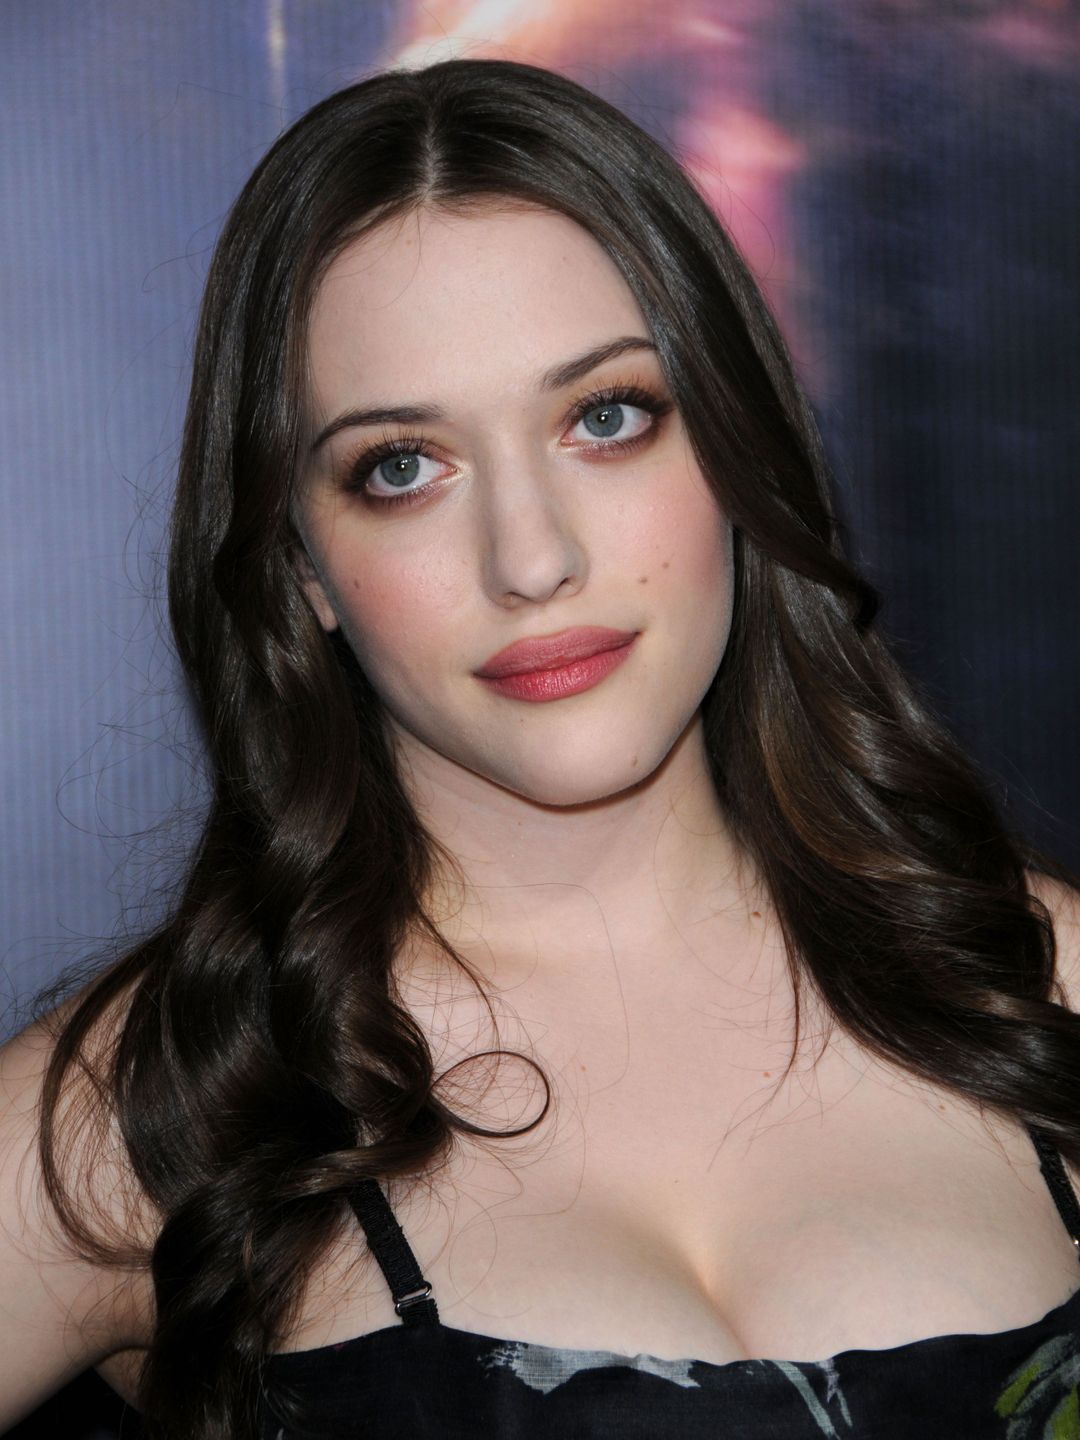 Kat Dennings who is her mother